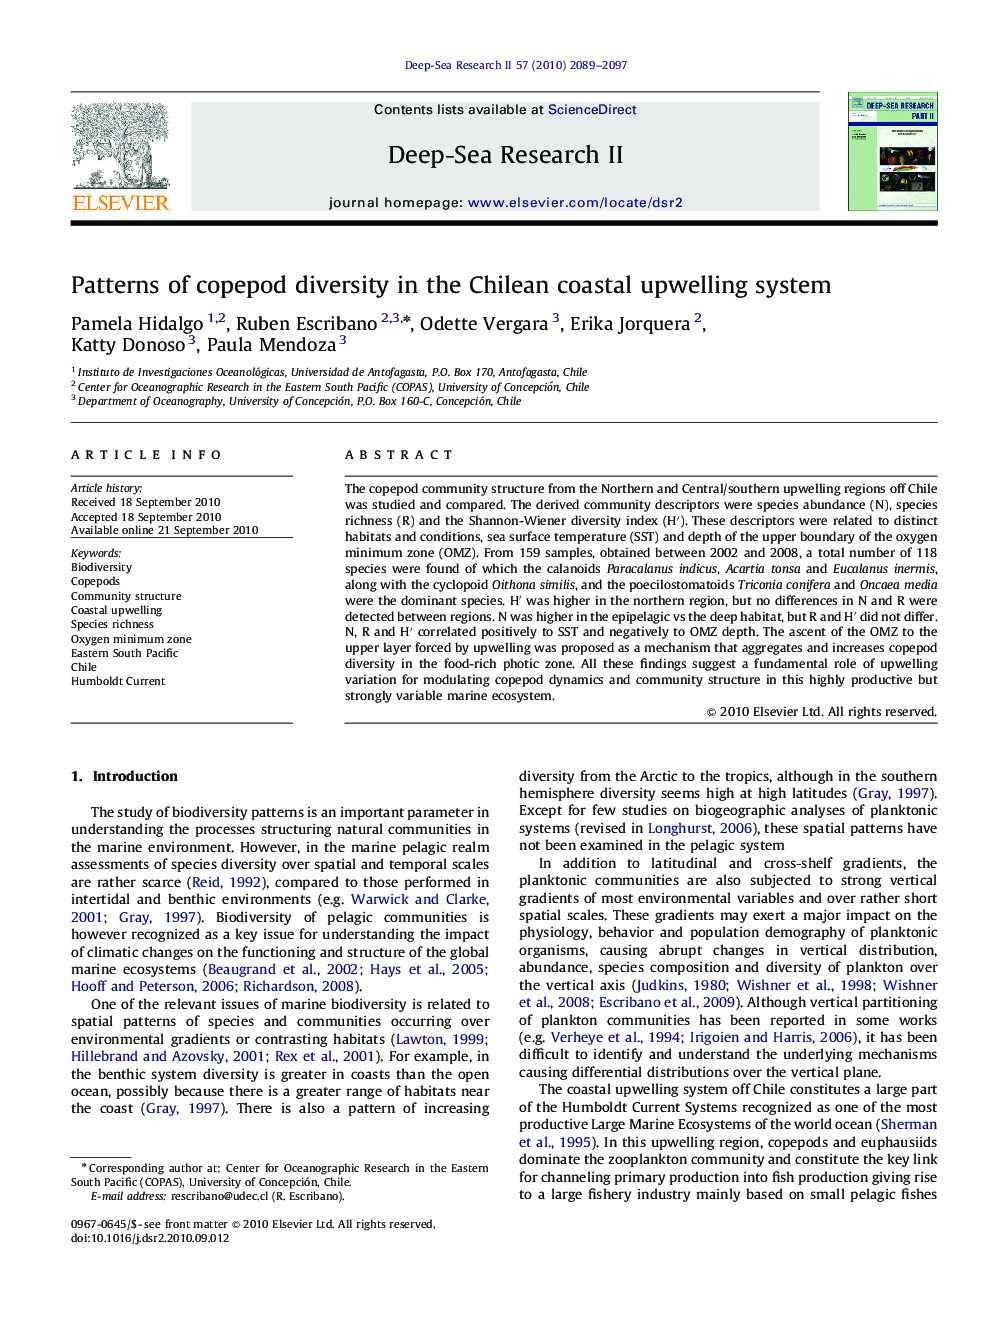 Patterns of copepod diversity in the Chilean coastal upwelling system